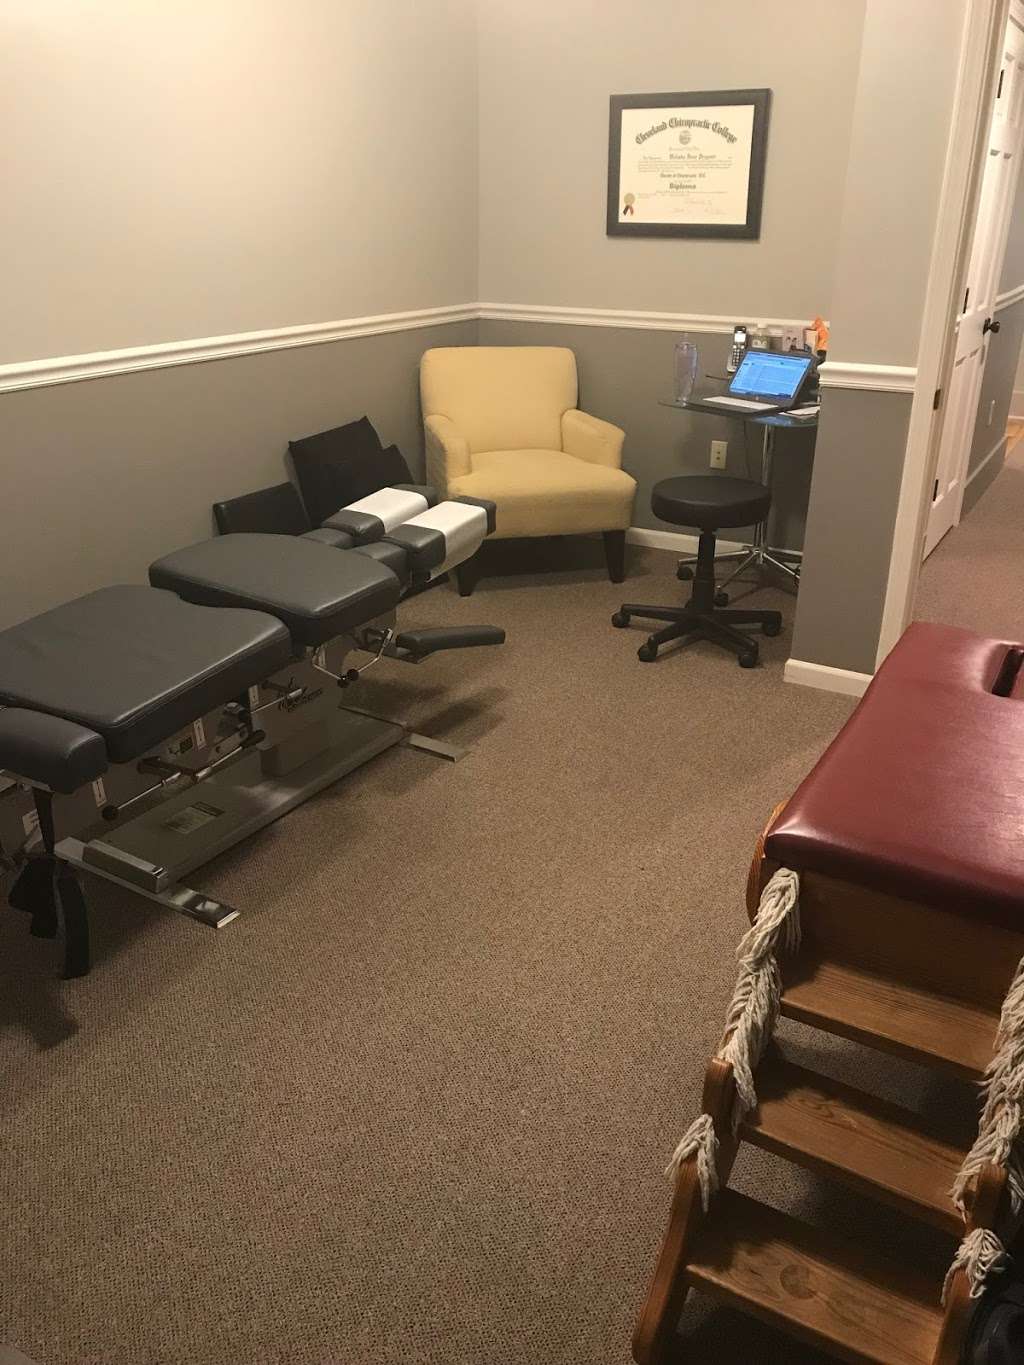 Trusted Care Chiropractic | 310 Commercial St, Atchison, KS 66002 | Phone: (913) 367-5103